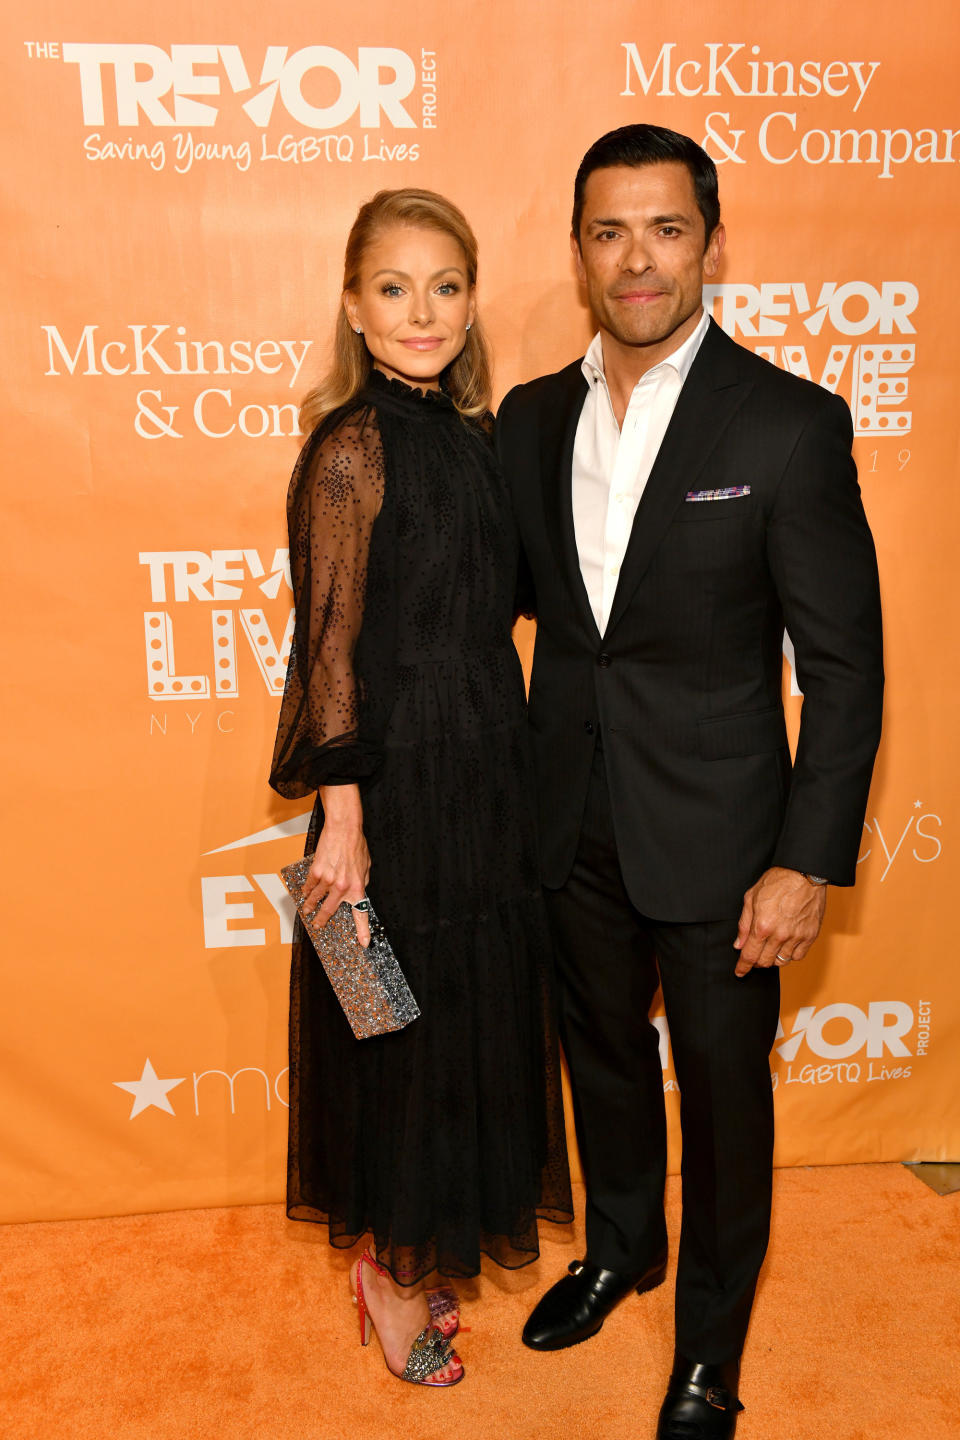   Craig Barritt / Getty Images  for The Trevor Project